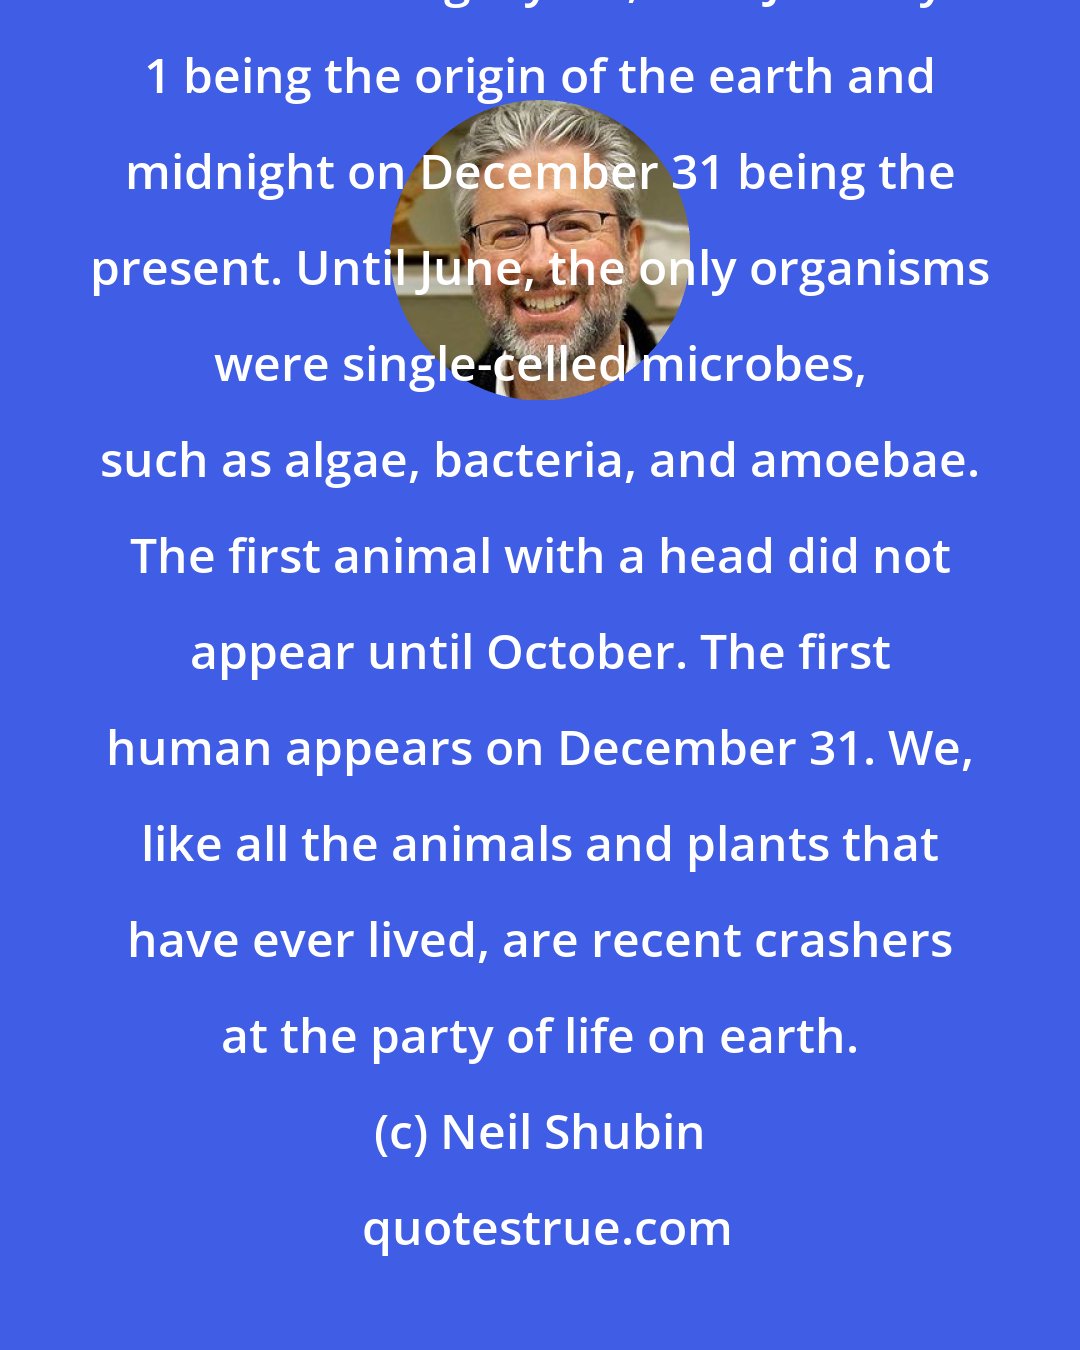 Neil Shubin: Take the entire 4.5-billion-year history of the earth and scale it down to a single year, with January 1 being the origin of the earth and midnight on December 31 being the present. Until June, the only organisms were single-celled microbes, such as algae, bacteria, and amoebae. The first animal with a head did not appear until October. The first human appears on December 31. We, like all the animals and plants that have ever lived, are recent crashers at the party of life on earth.